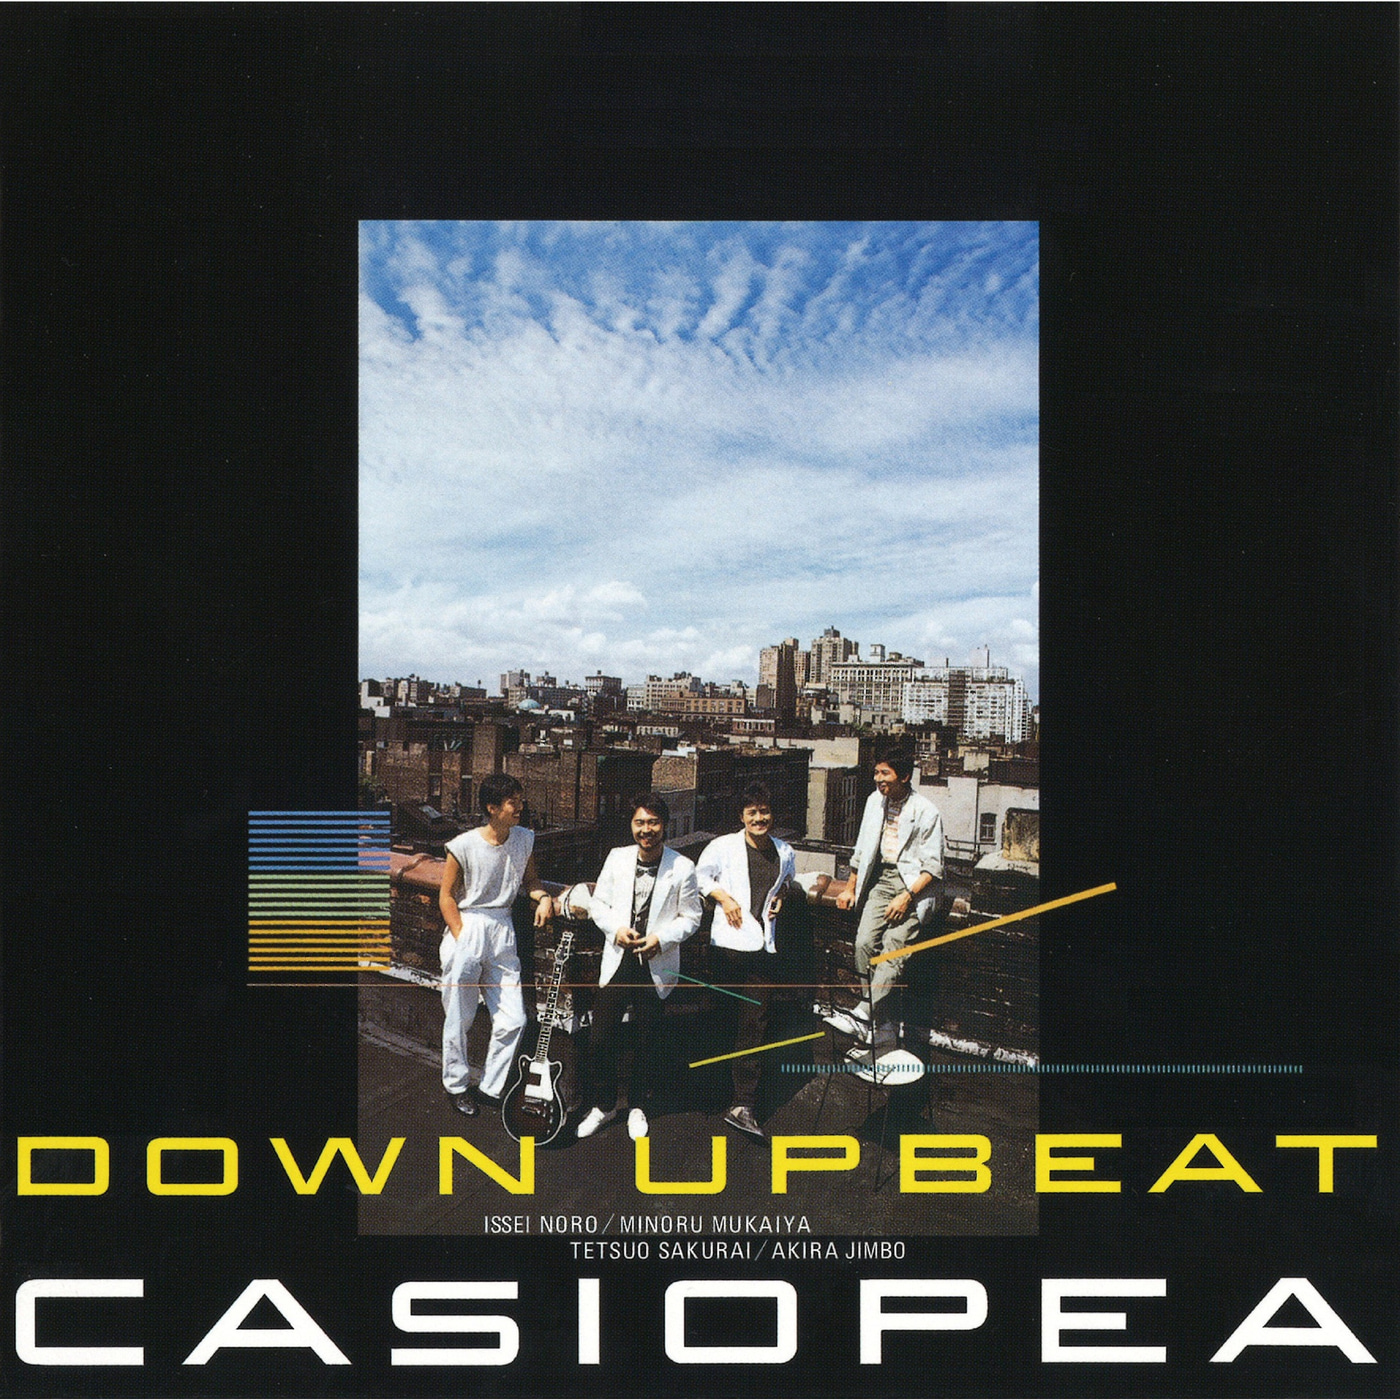 Casiopea-The Continental Way